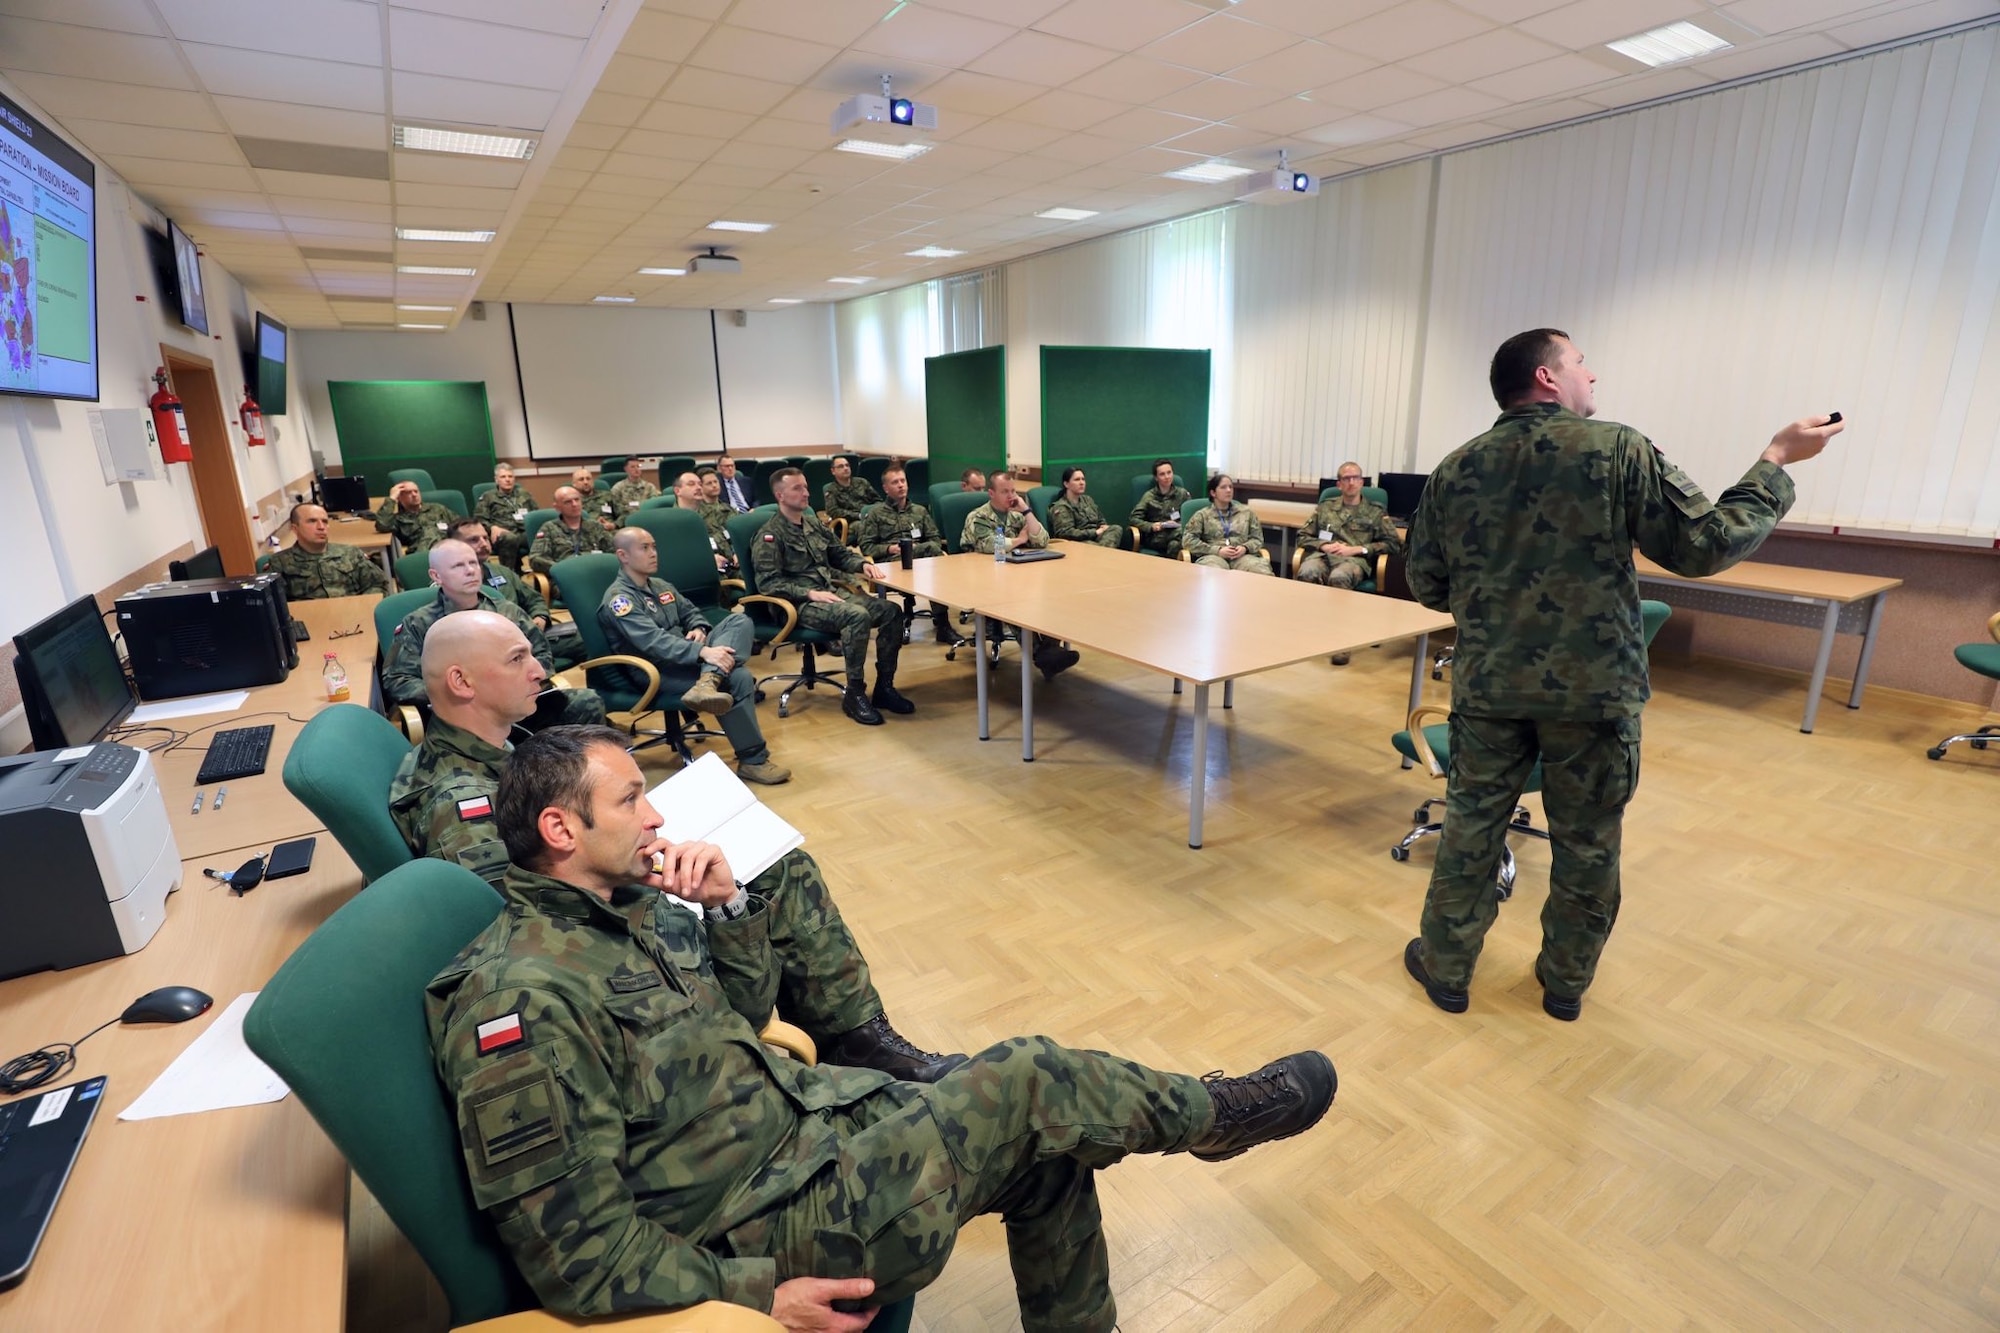 Lt Col Andrzej Krolikowski from the Air Force and Air Defense Department at the Polish War Studies University explains the process that will be used for wargaming the allied courses of action against expected enemy courses of action.